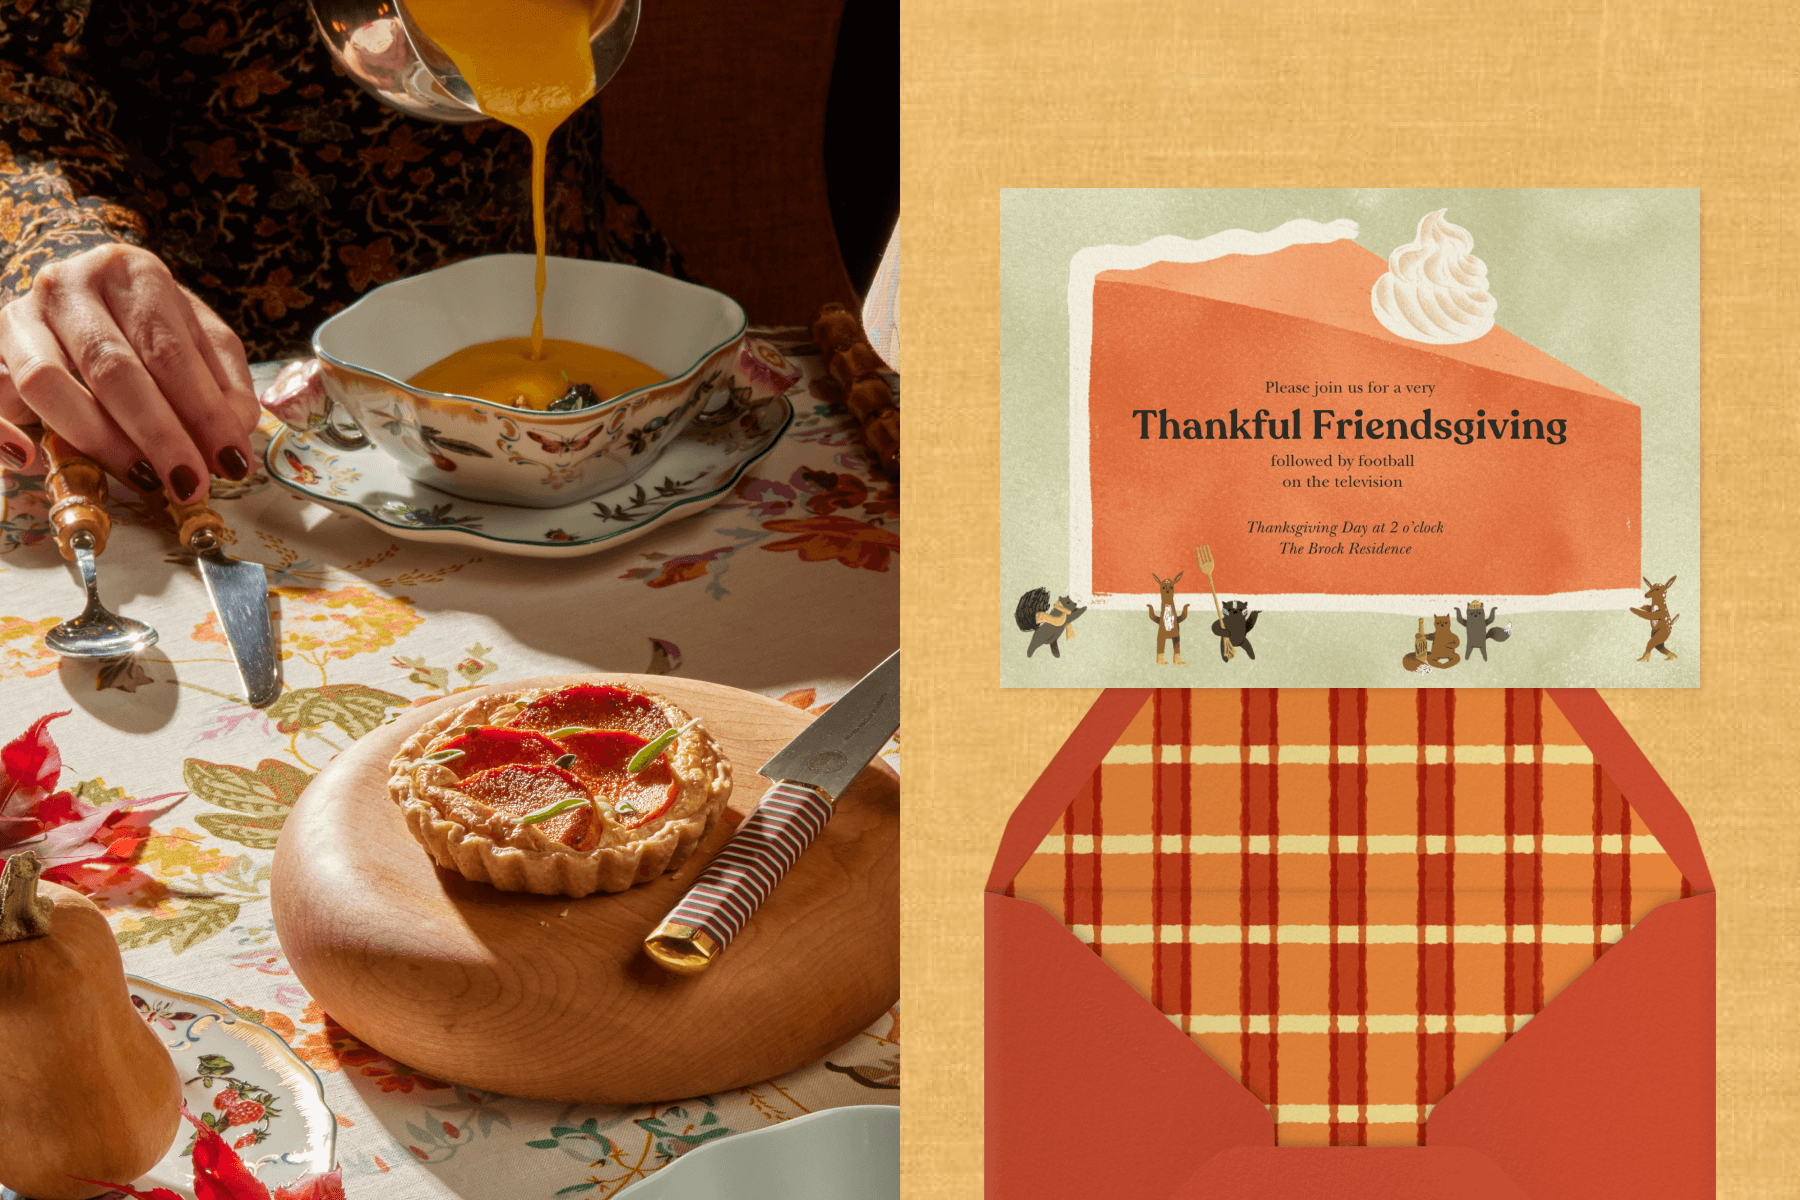 Left: Orange soup is poured into a bowl by someone sitting at a table, and a small tarte is on a wooden serving tray in the foreground. Right: A Friendsgiving invitation has a large slice of pumpkin pie carried by small woodland characters, above an orange envelope with plaid liner.